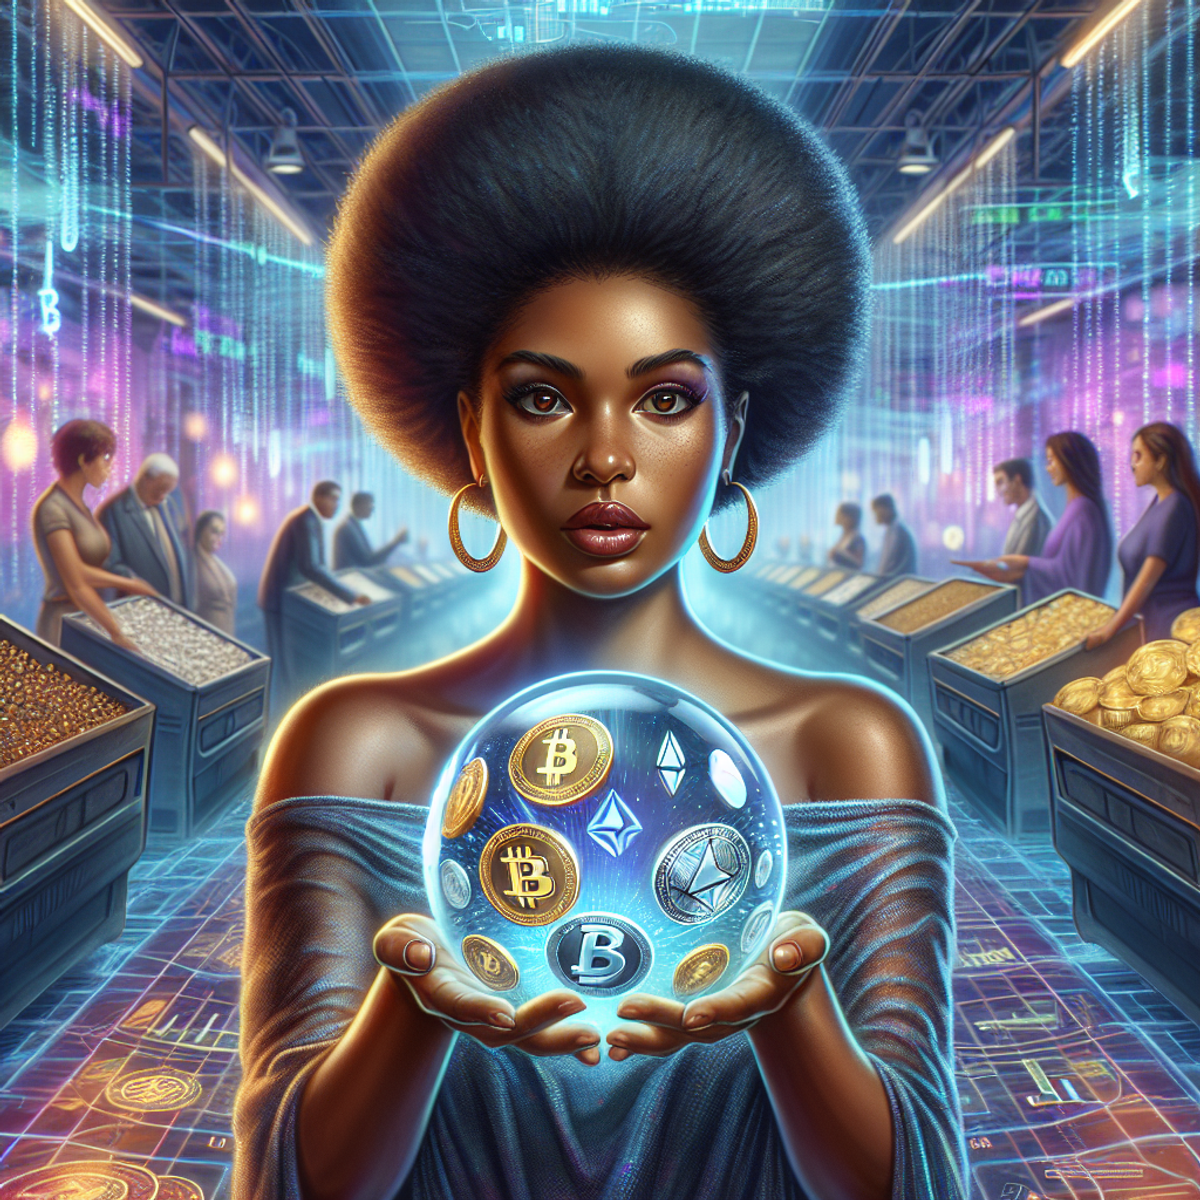 An Afro-Caribbean woman stands in a futuristic market setting, clutching a gleaming crystal ball reflecting varied altcoin symbols.